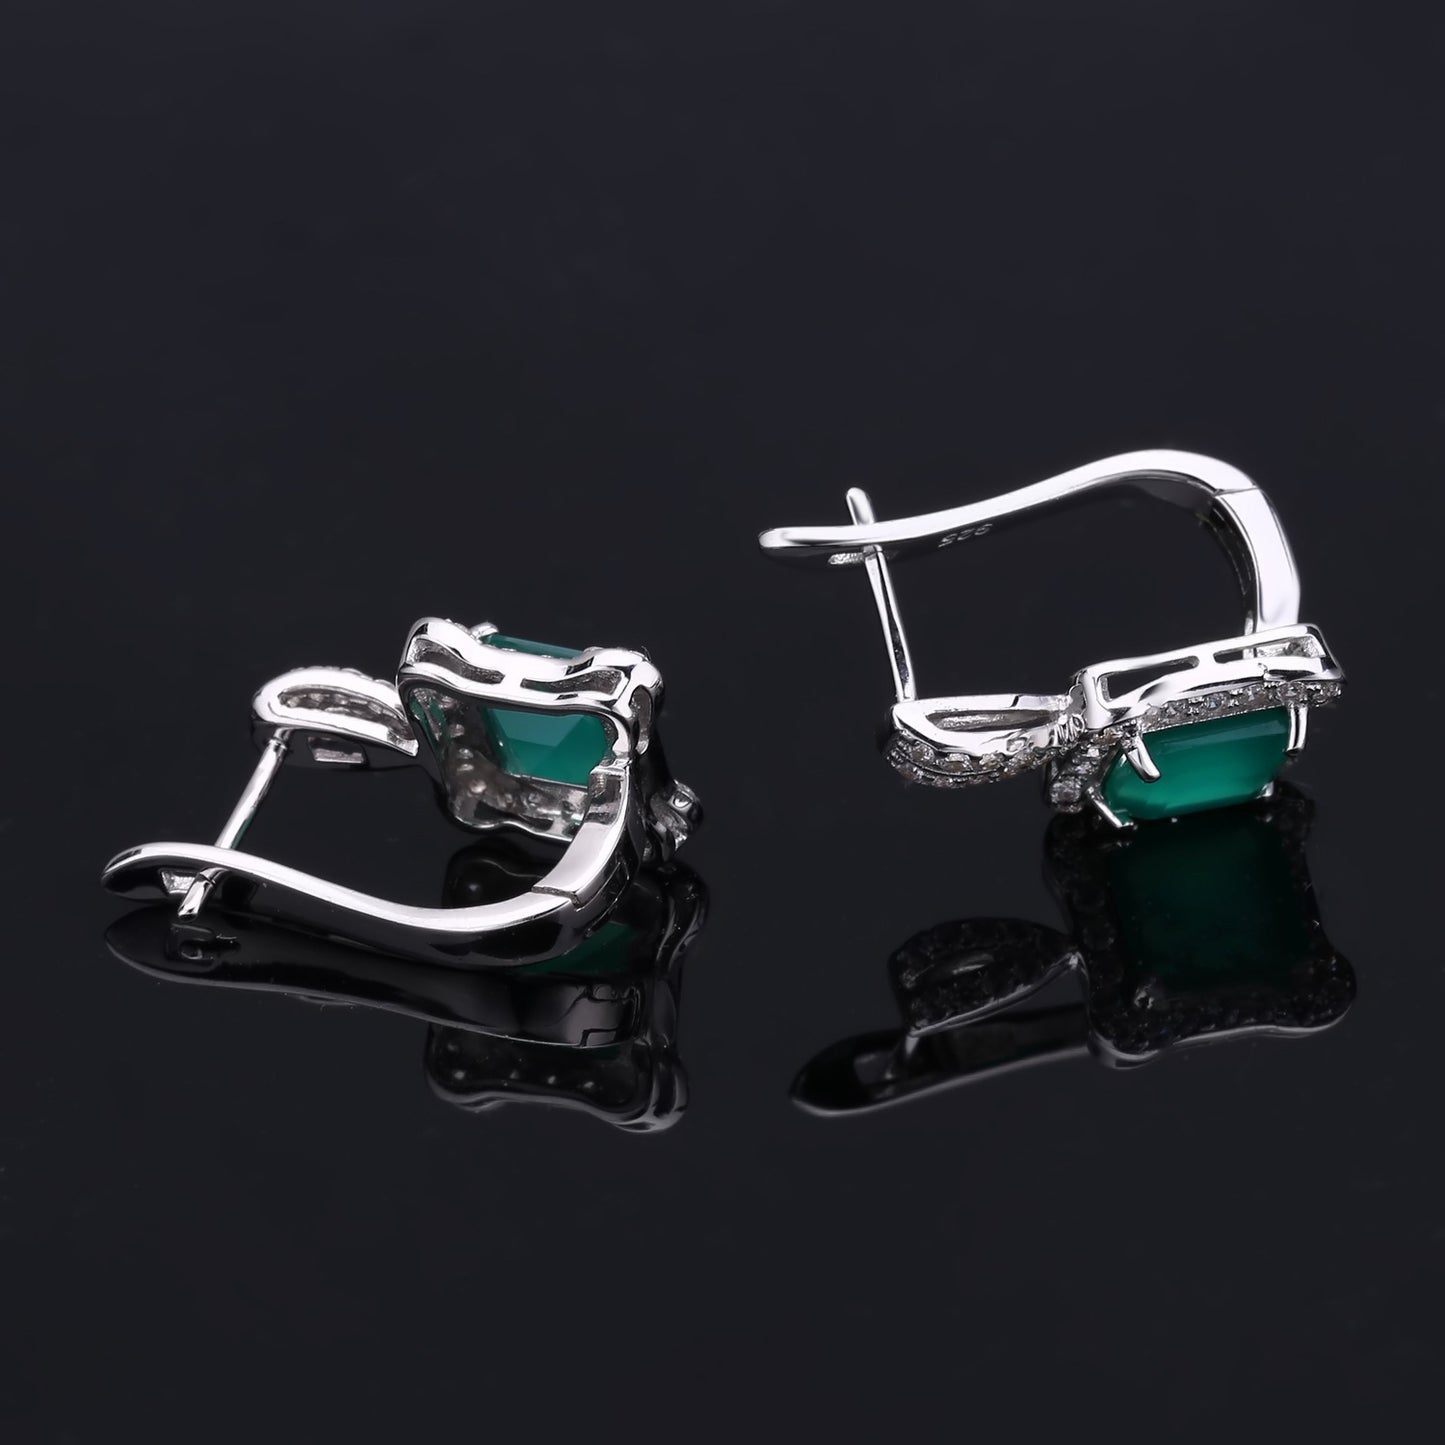 Natural Green Agate Soleste Halo Square Silver Studs Earrings for Women